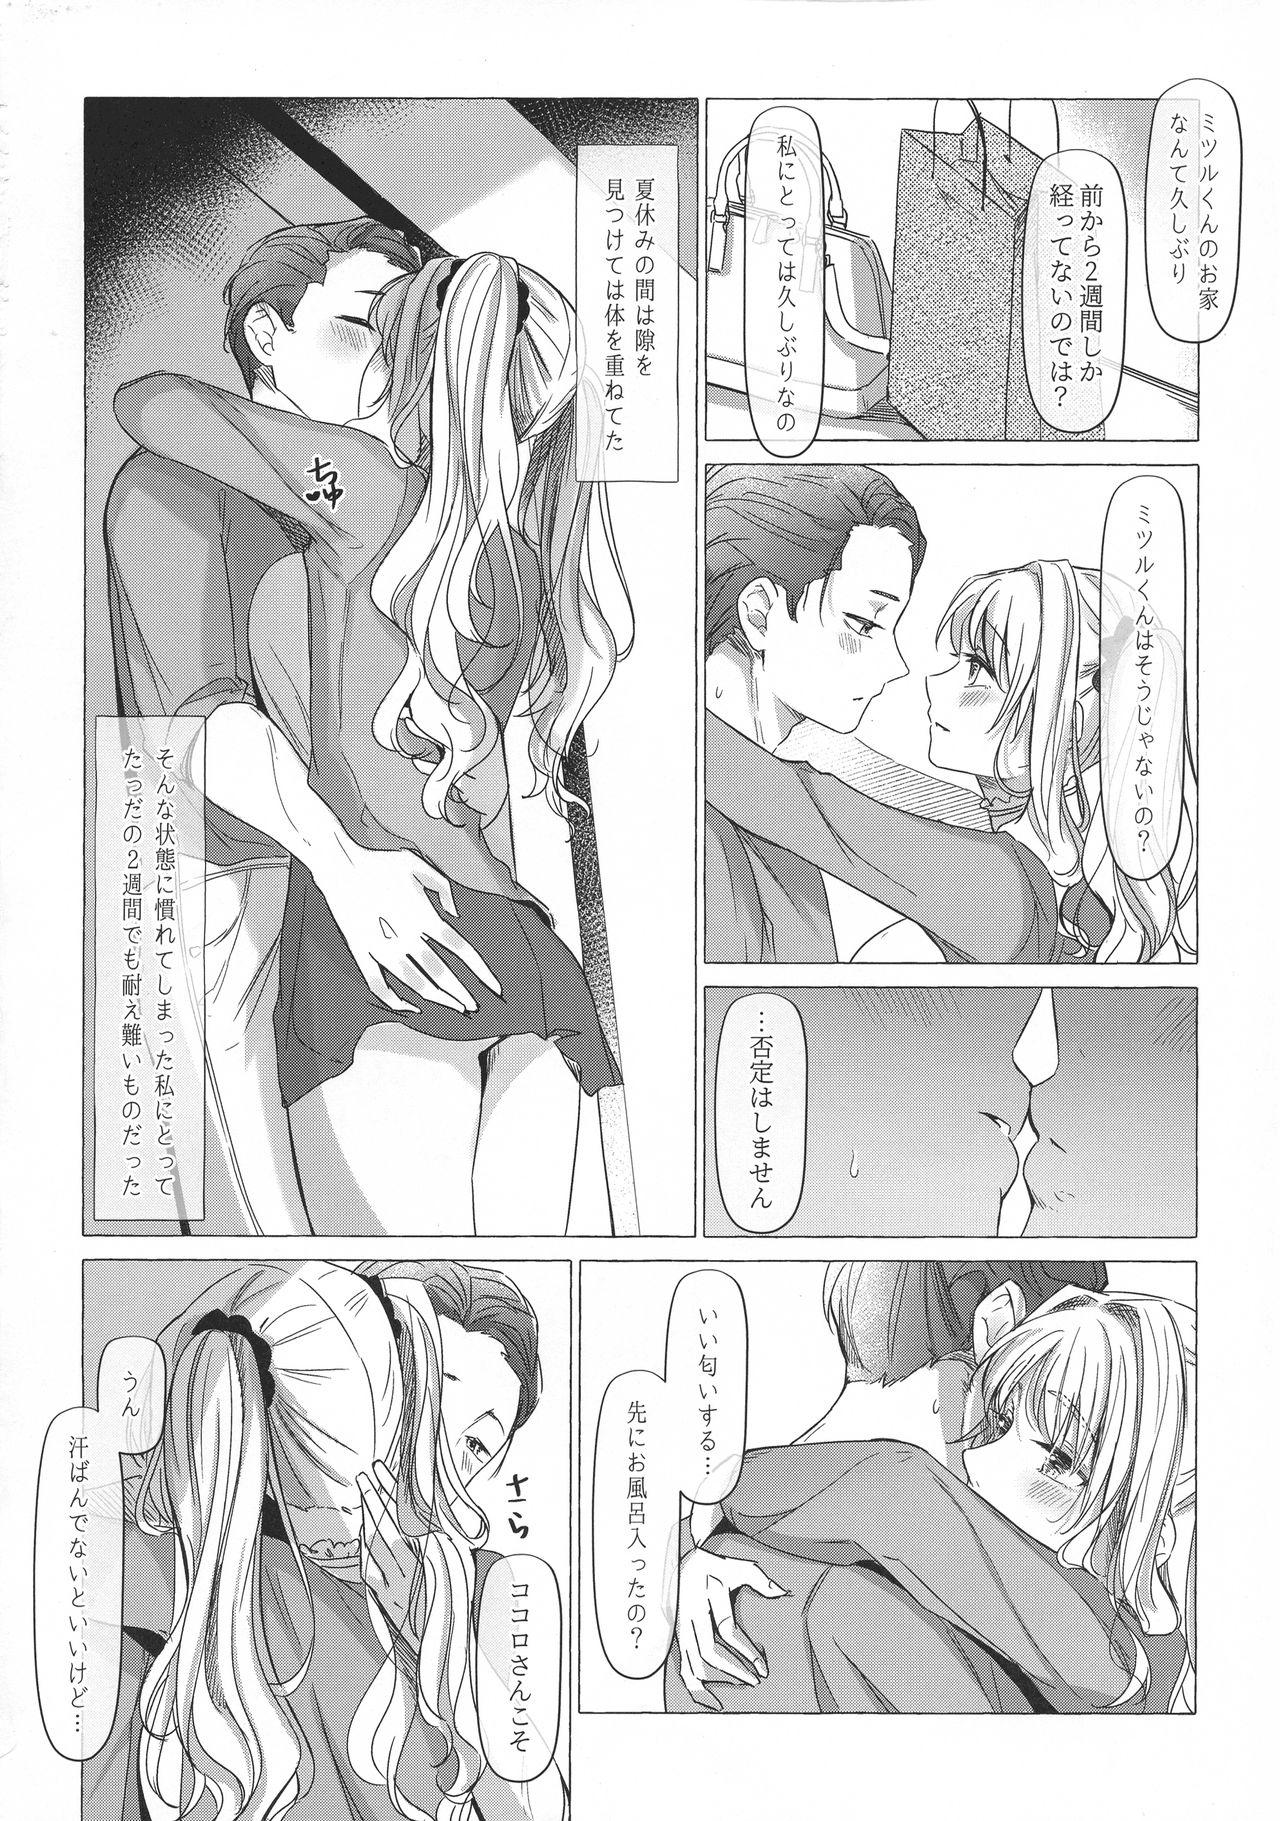 Muscular 満心総意の躾 - Darling in the franxx Camgirls - Page 11